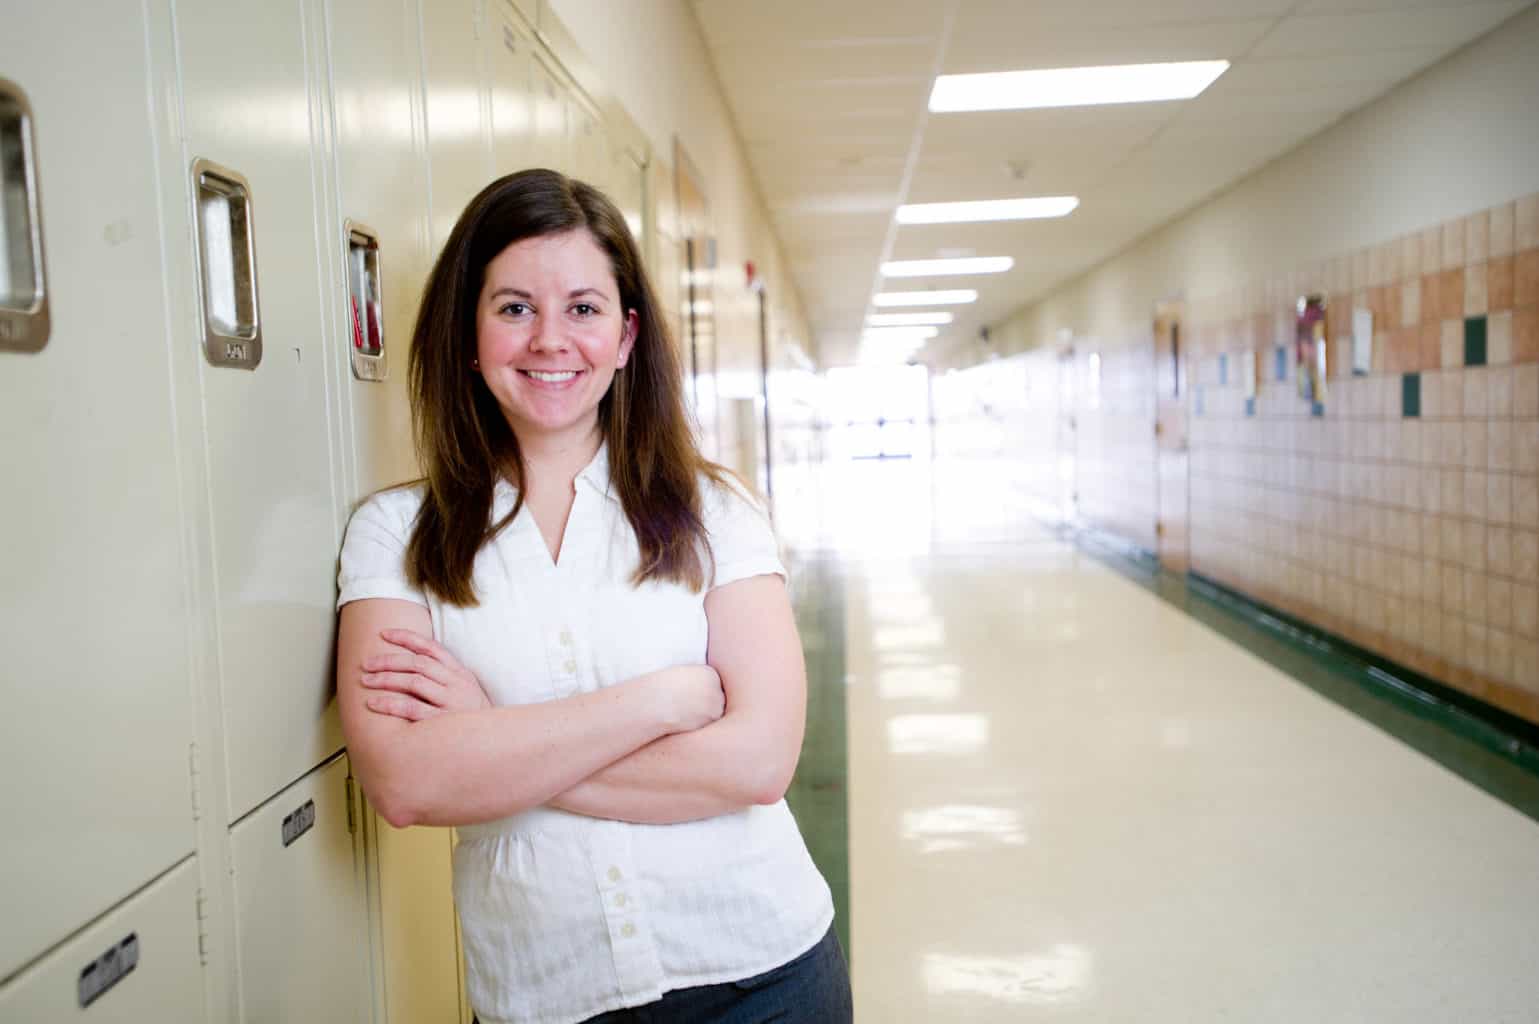 Woman school counselor standing in front of lockers.